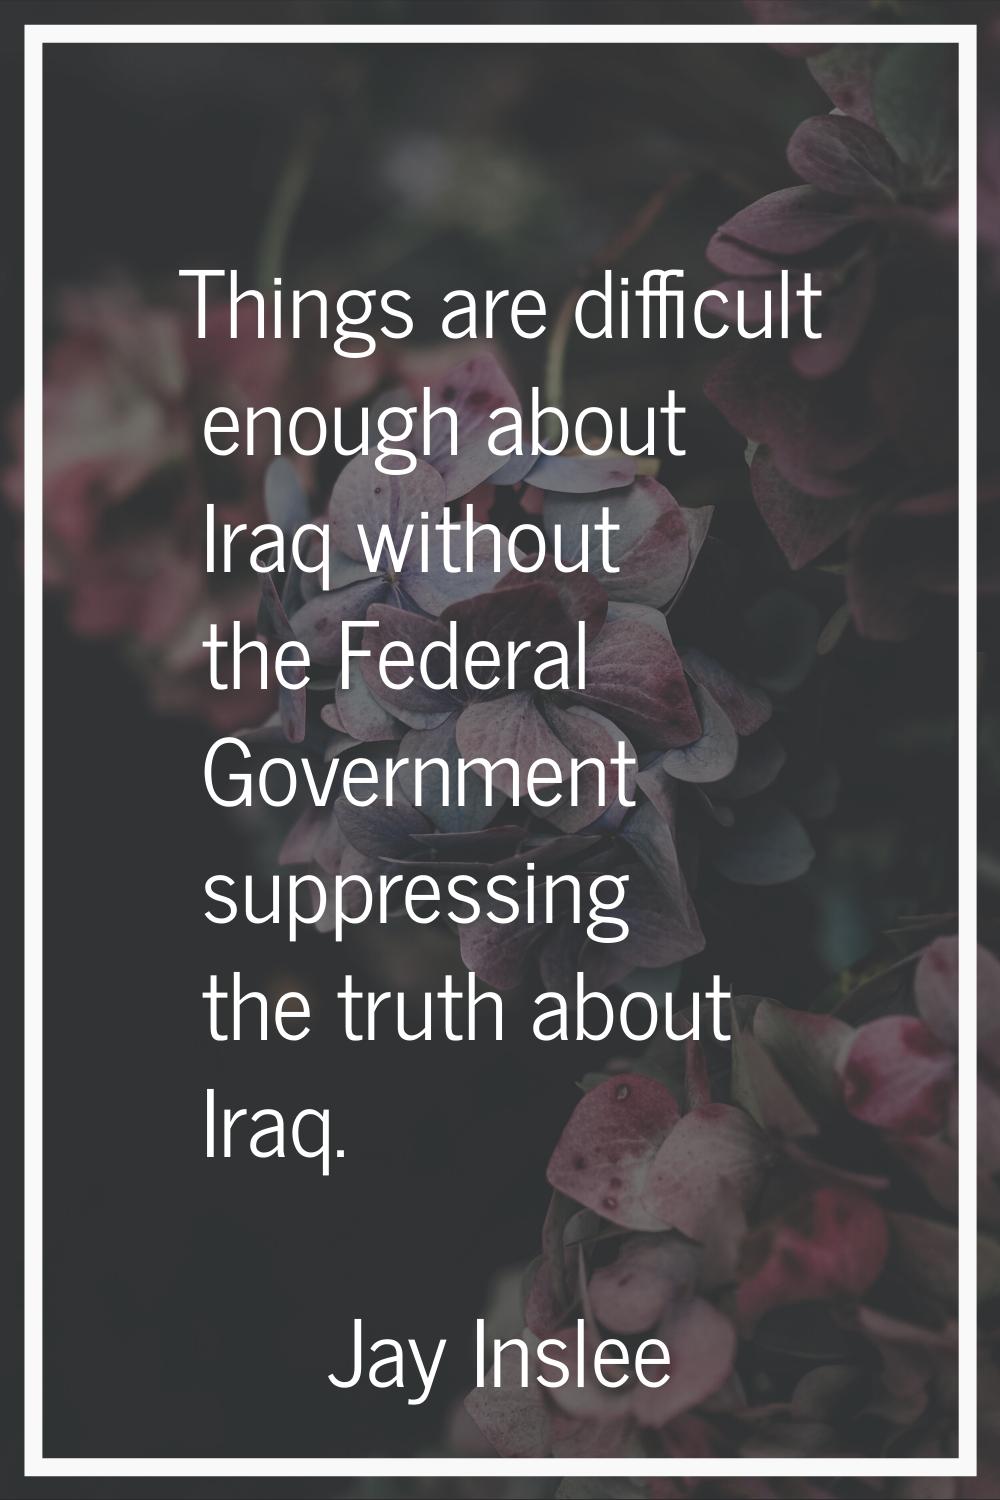 Things are difficult enough about Iraq without the Federal Government suppressing the truth about I